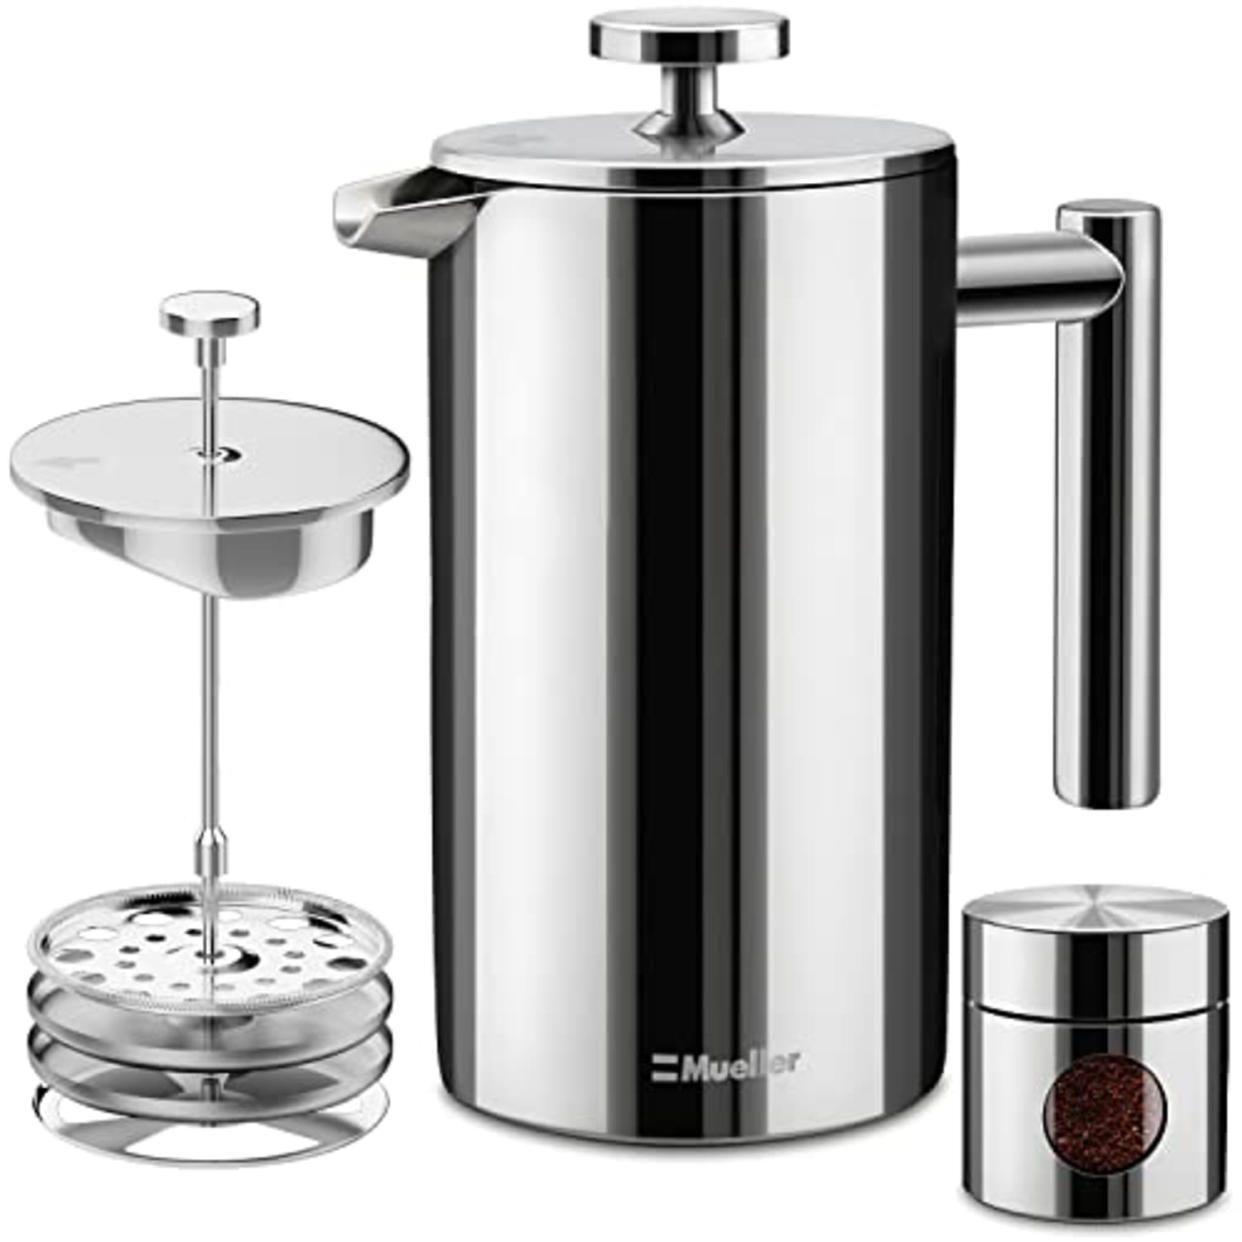 Mueller French Press Double Insulated 310 Stainless Steel Coffee Maker 4 Level Filtration System, No Coffee Grounds, Rust-Free, Dishwasher Safe (AMAZON)